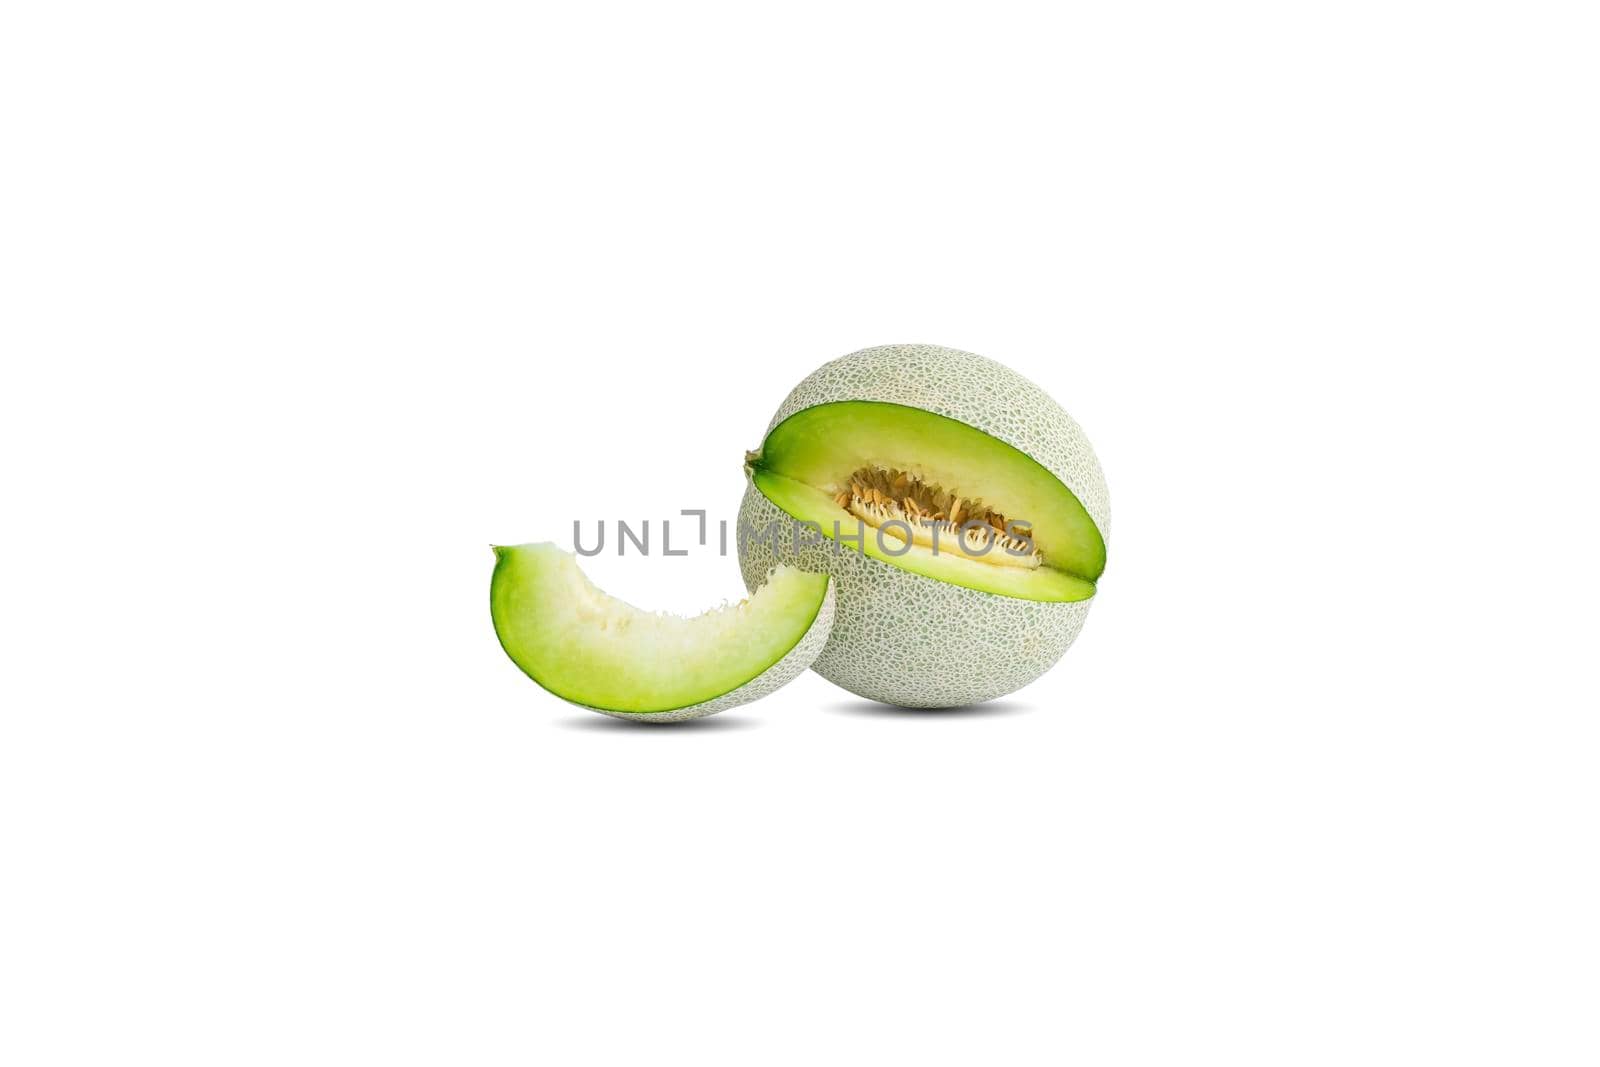 One cantaloupe or melon and one piece isolated on white background.